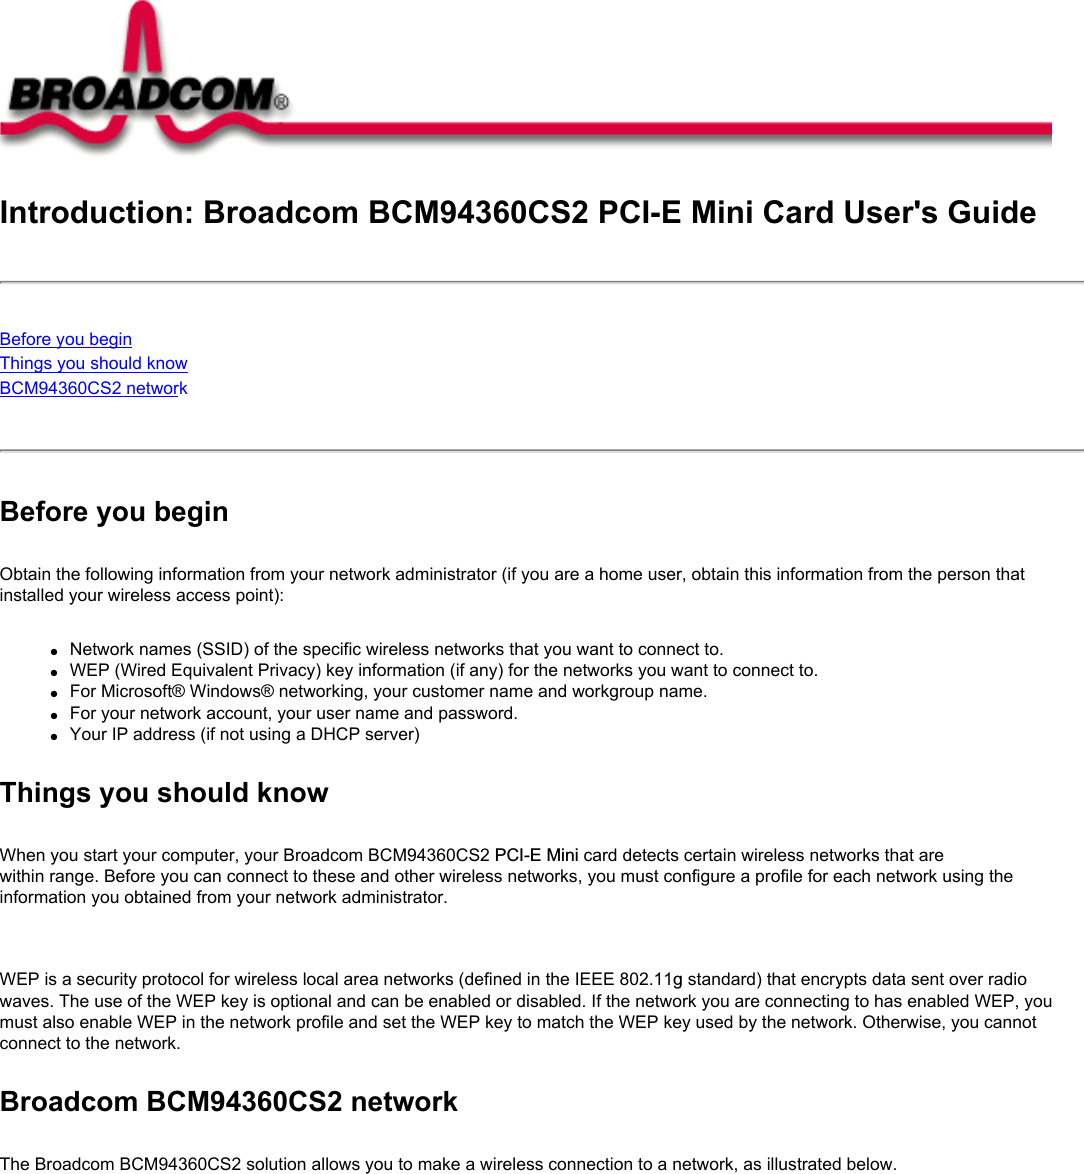 Introduction: Broadcom BCM94360CS2 PCI-E Mini Card User&apos;s GuideBefore you beginThings you should knowBCM94360CS2 network Before you beginObtain the following information from your network administrator (if you are a home user, obtain this information from the person that installed your wireless access point):●     Network names (SSID) of the specific wireless networks that you want to connect to.●     WEP (Wired Equivalent Privacy) key information (if any) for the networks you want to connect to.●     For Microsoft® Windows® networking, your customer name and workgroup name.●     For your network account, your user name and password.●     Your IP address (if not using a DHCP server)Things you should knowWhen you start your computer, your Broadcom BCM94360CS2 PCI-E Mini card detects certain wireless networks that are within range. Before you can connect to these and other wireless networks, you must configure a profile for each network using the information you obtained from your network administrator.   WEP is a security protocol for wireless local area networks (defined in the IEEE 802.11g standard) that encrypts data sent over radio waves. The use of the WEP key is optional and can be enabled or disabled. If the network you are connecting to has enabled WEP, you must also enable WEP in the network profile and set the WEP key to match the WEP key used by the network. Otherwise, you cannot connect to the network.Broadcom BCM94360CS2 networkThe Broadcom BCM94360CS2 solution allows you to make a wireless connection to a network, as illustrated below.